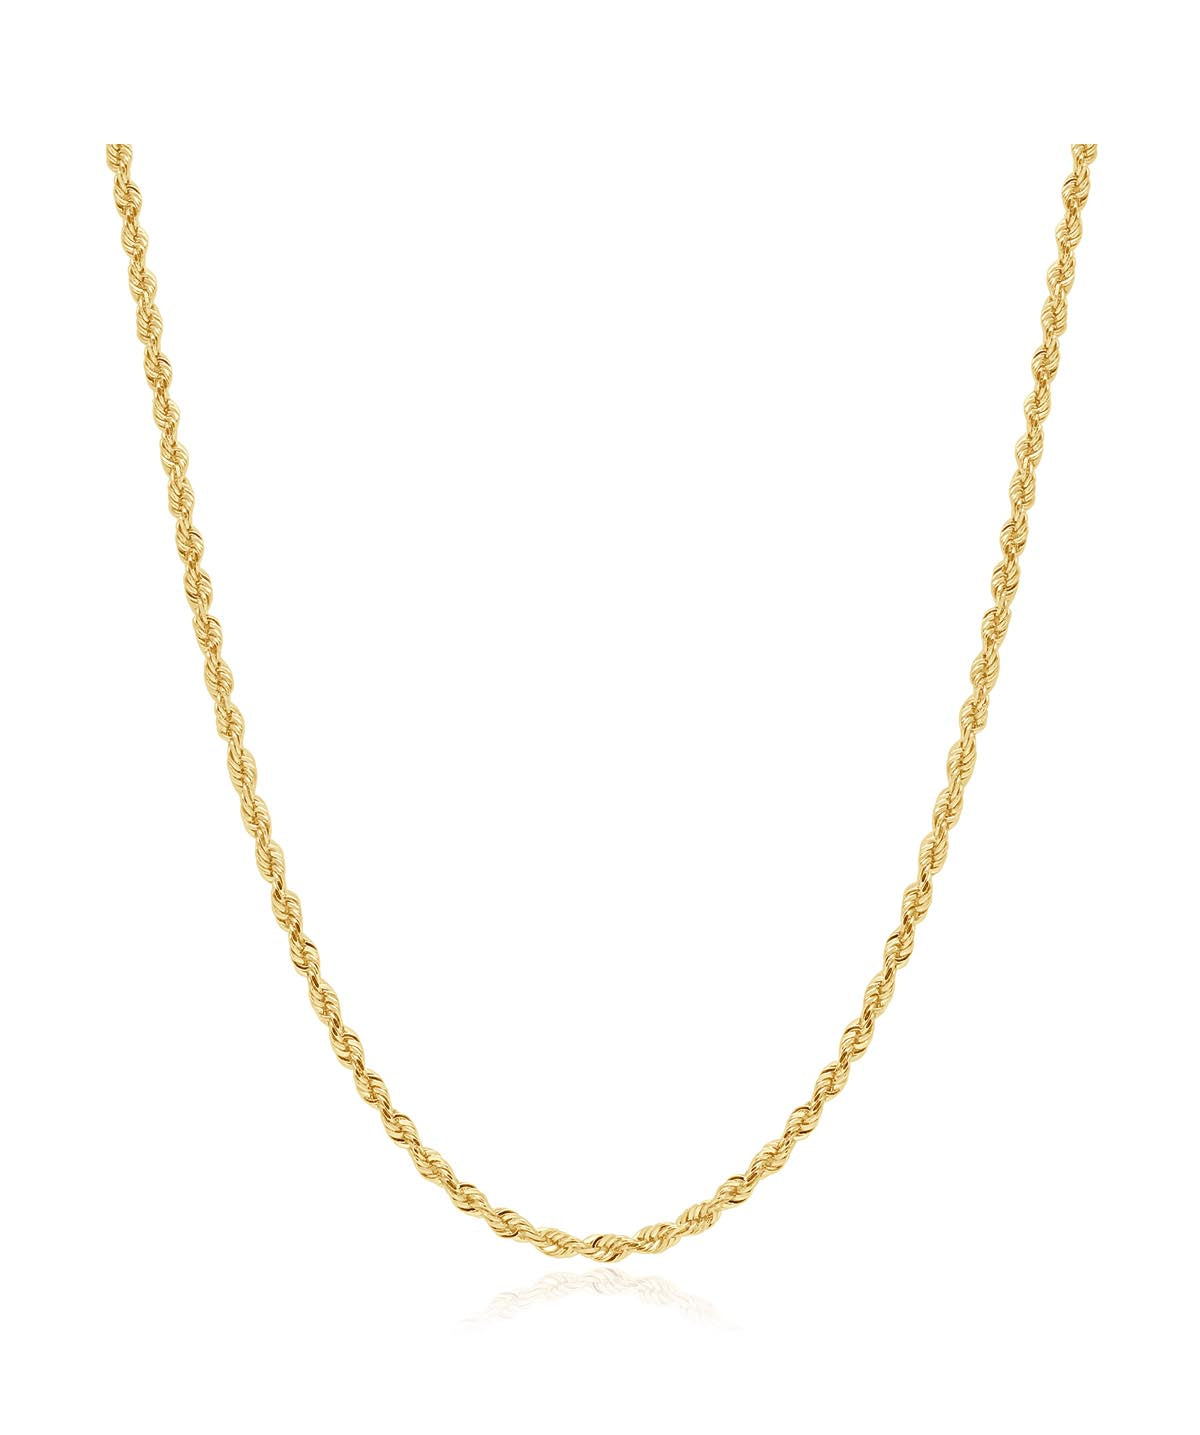 14K Yellow Gold Solid 2.0mm Rope Chain 24"